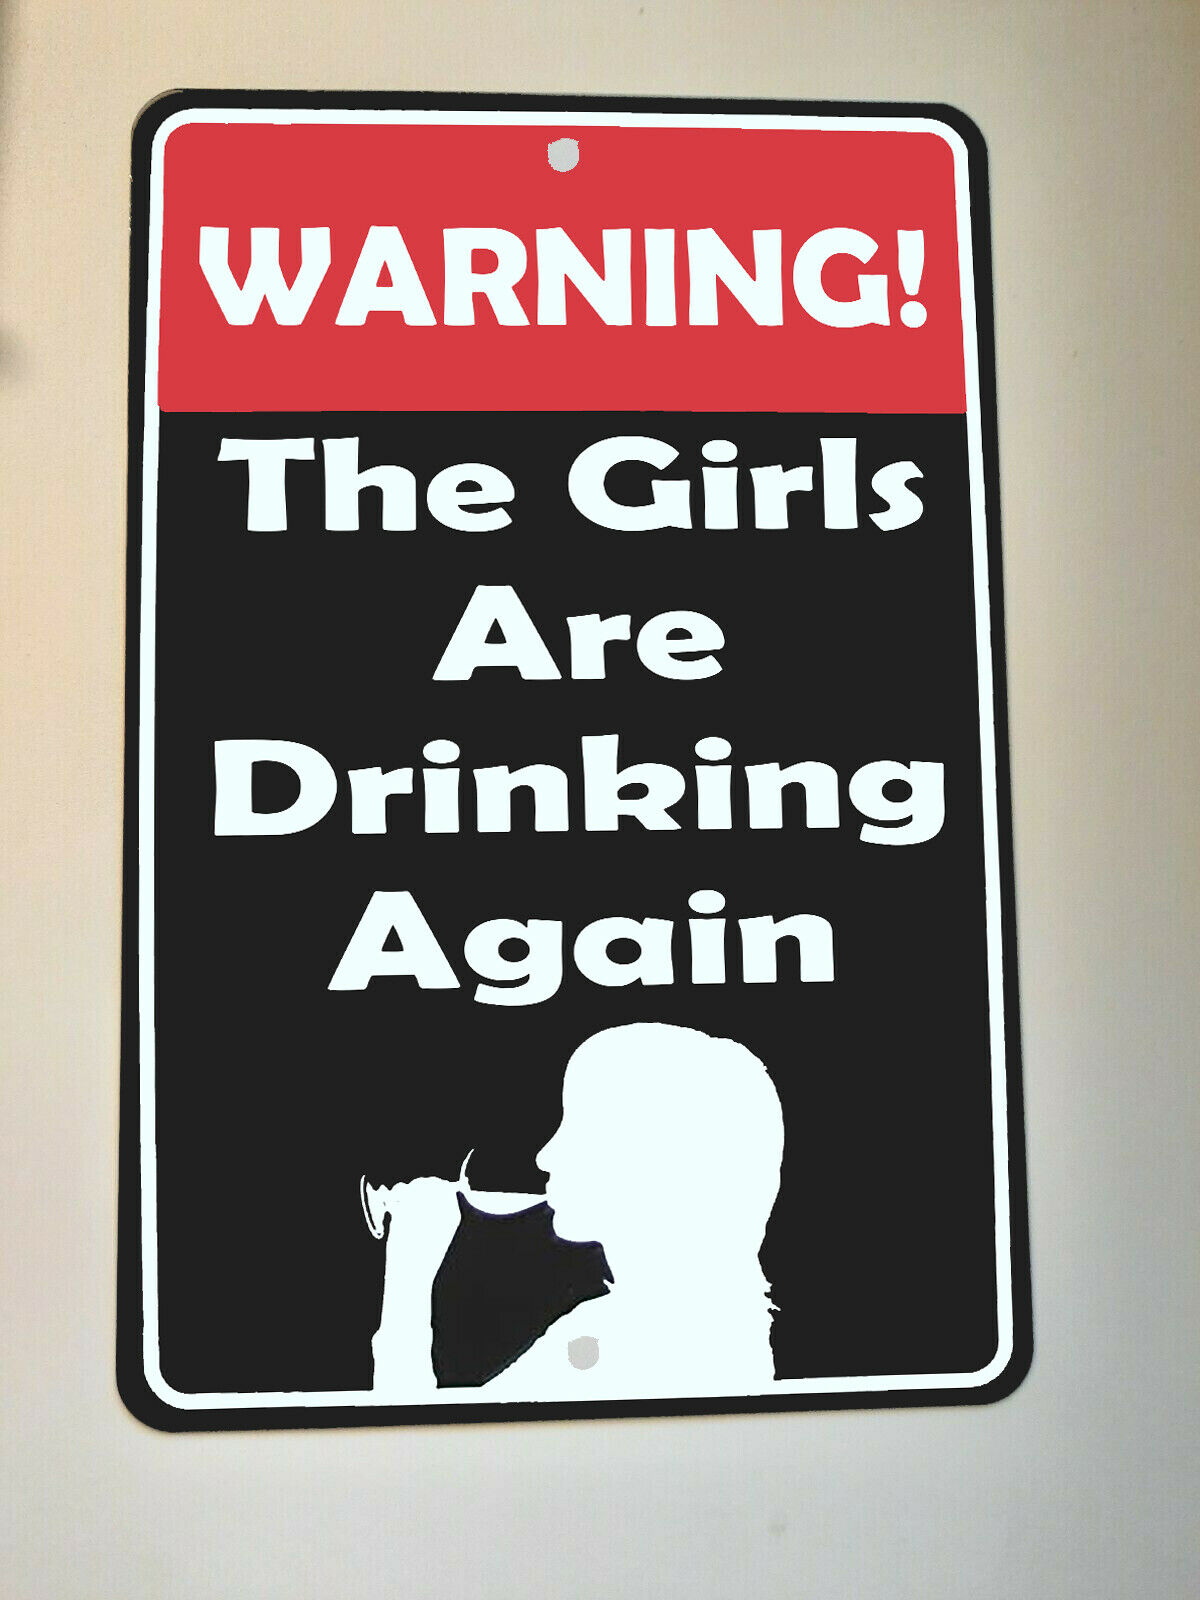 WARNING The Girls Are Drinking Again 8x12 Metal Wall Bar Sign